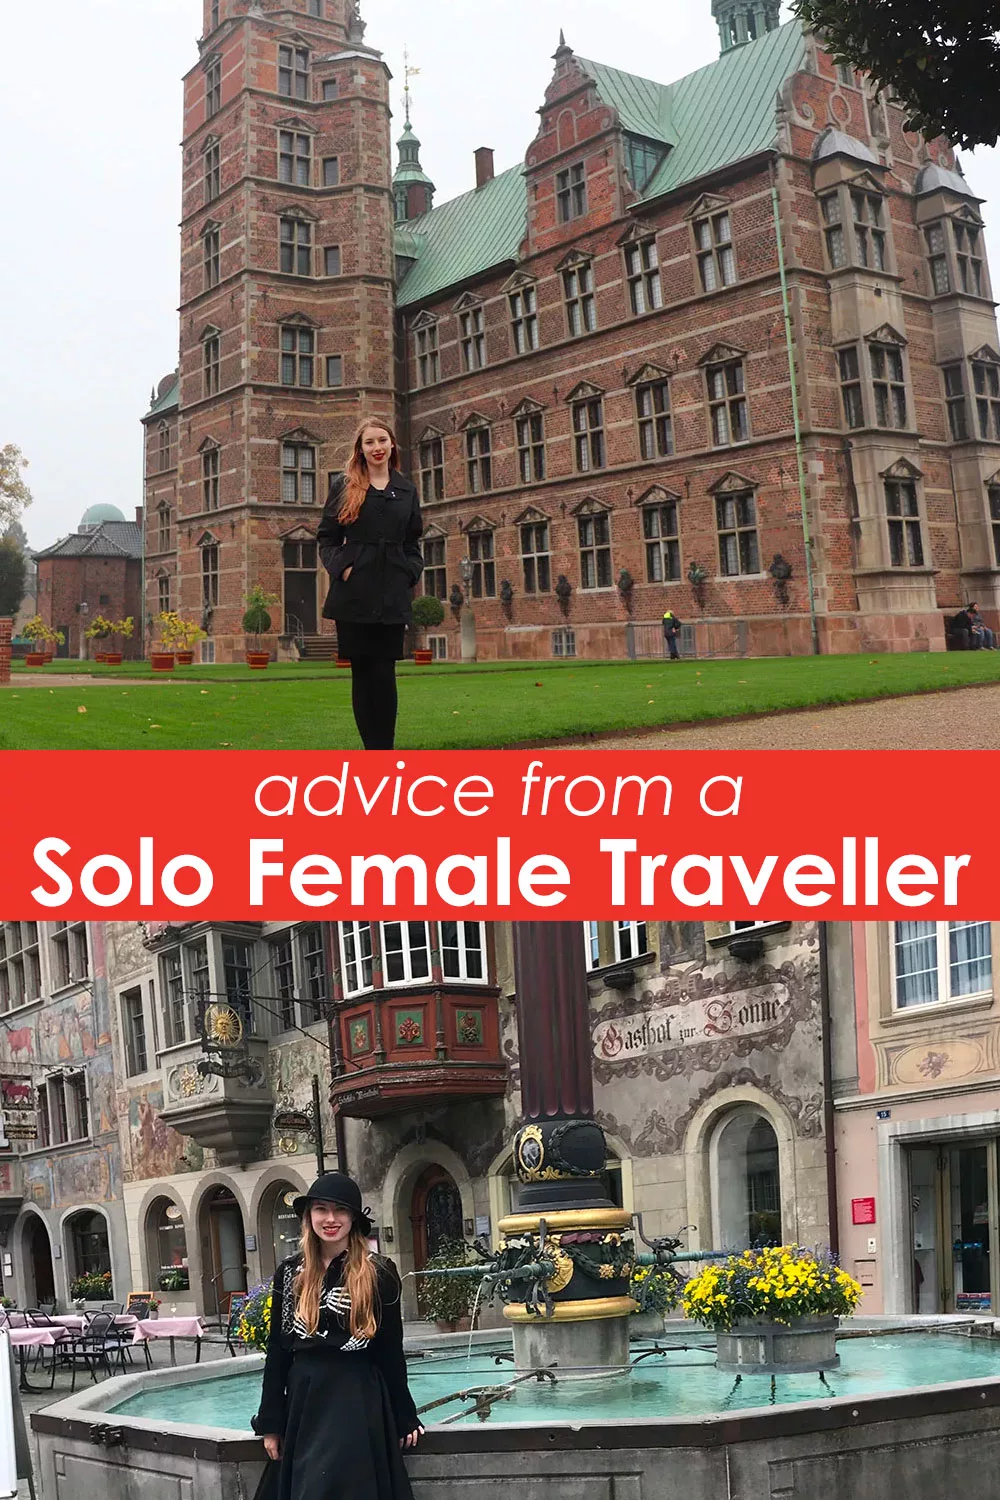 Advice from a Solo Female Traveller